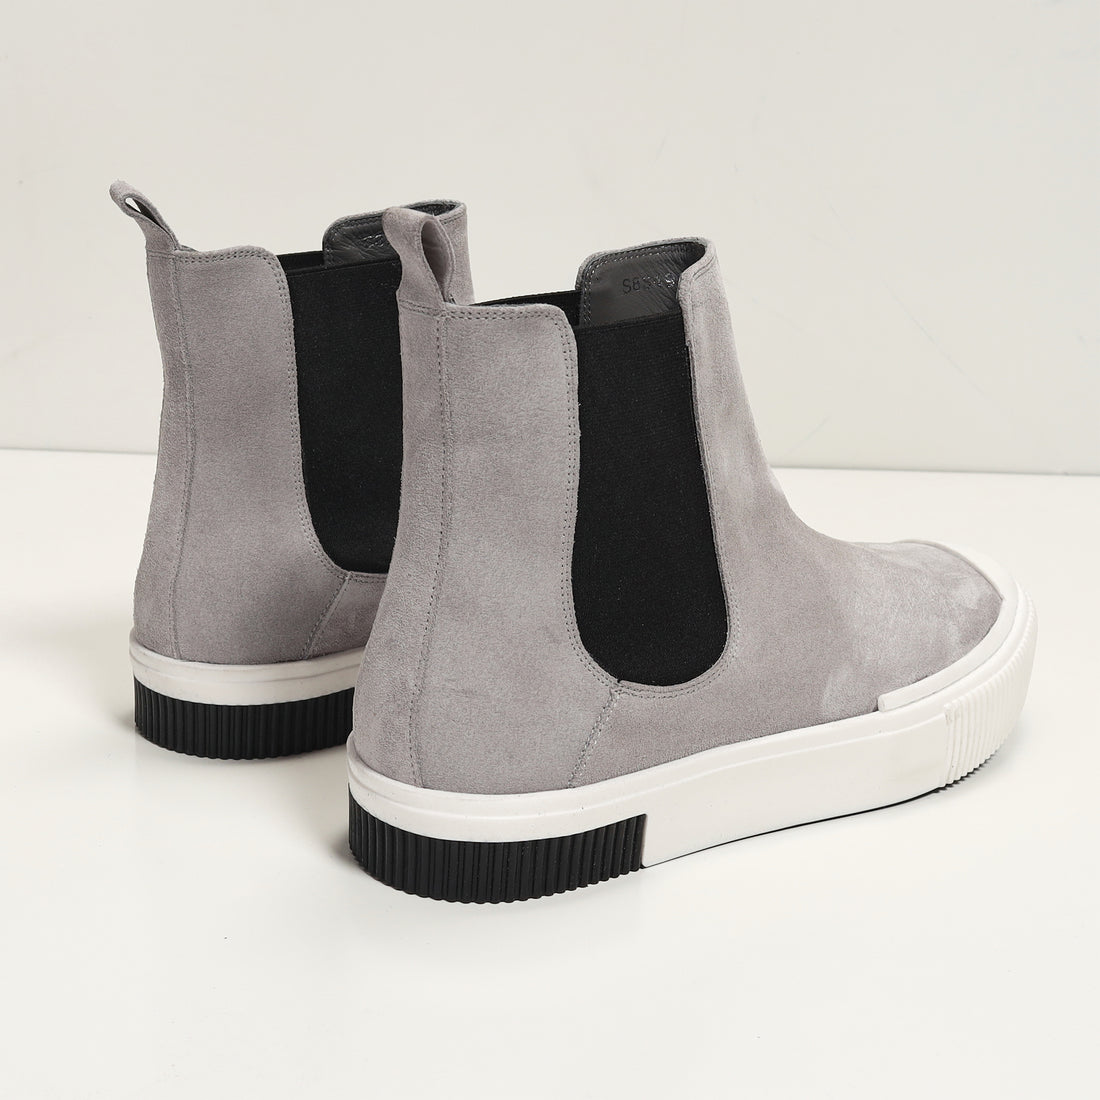 The King Suede Leather and Rubber Sole Chelsea Boots - Grey